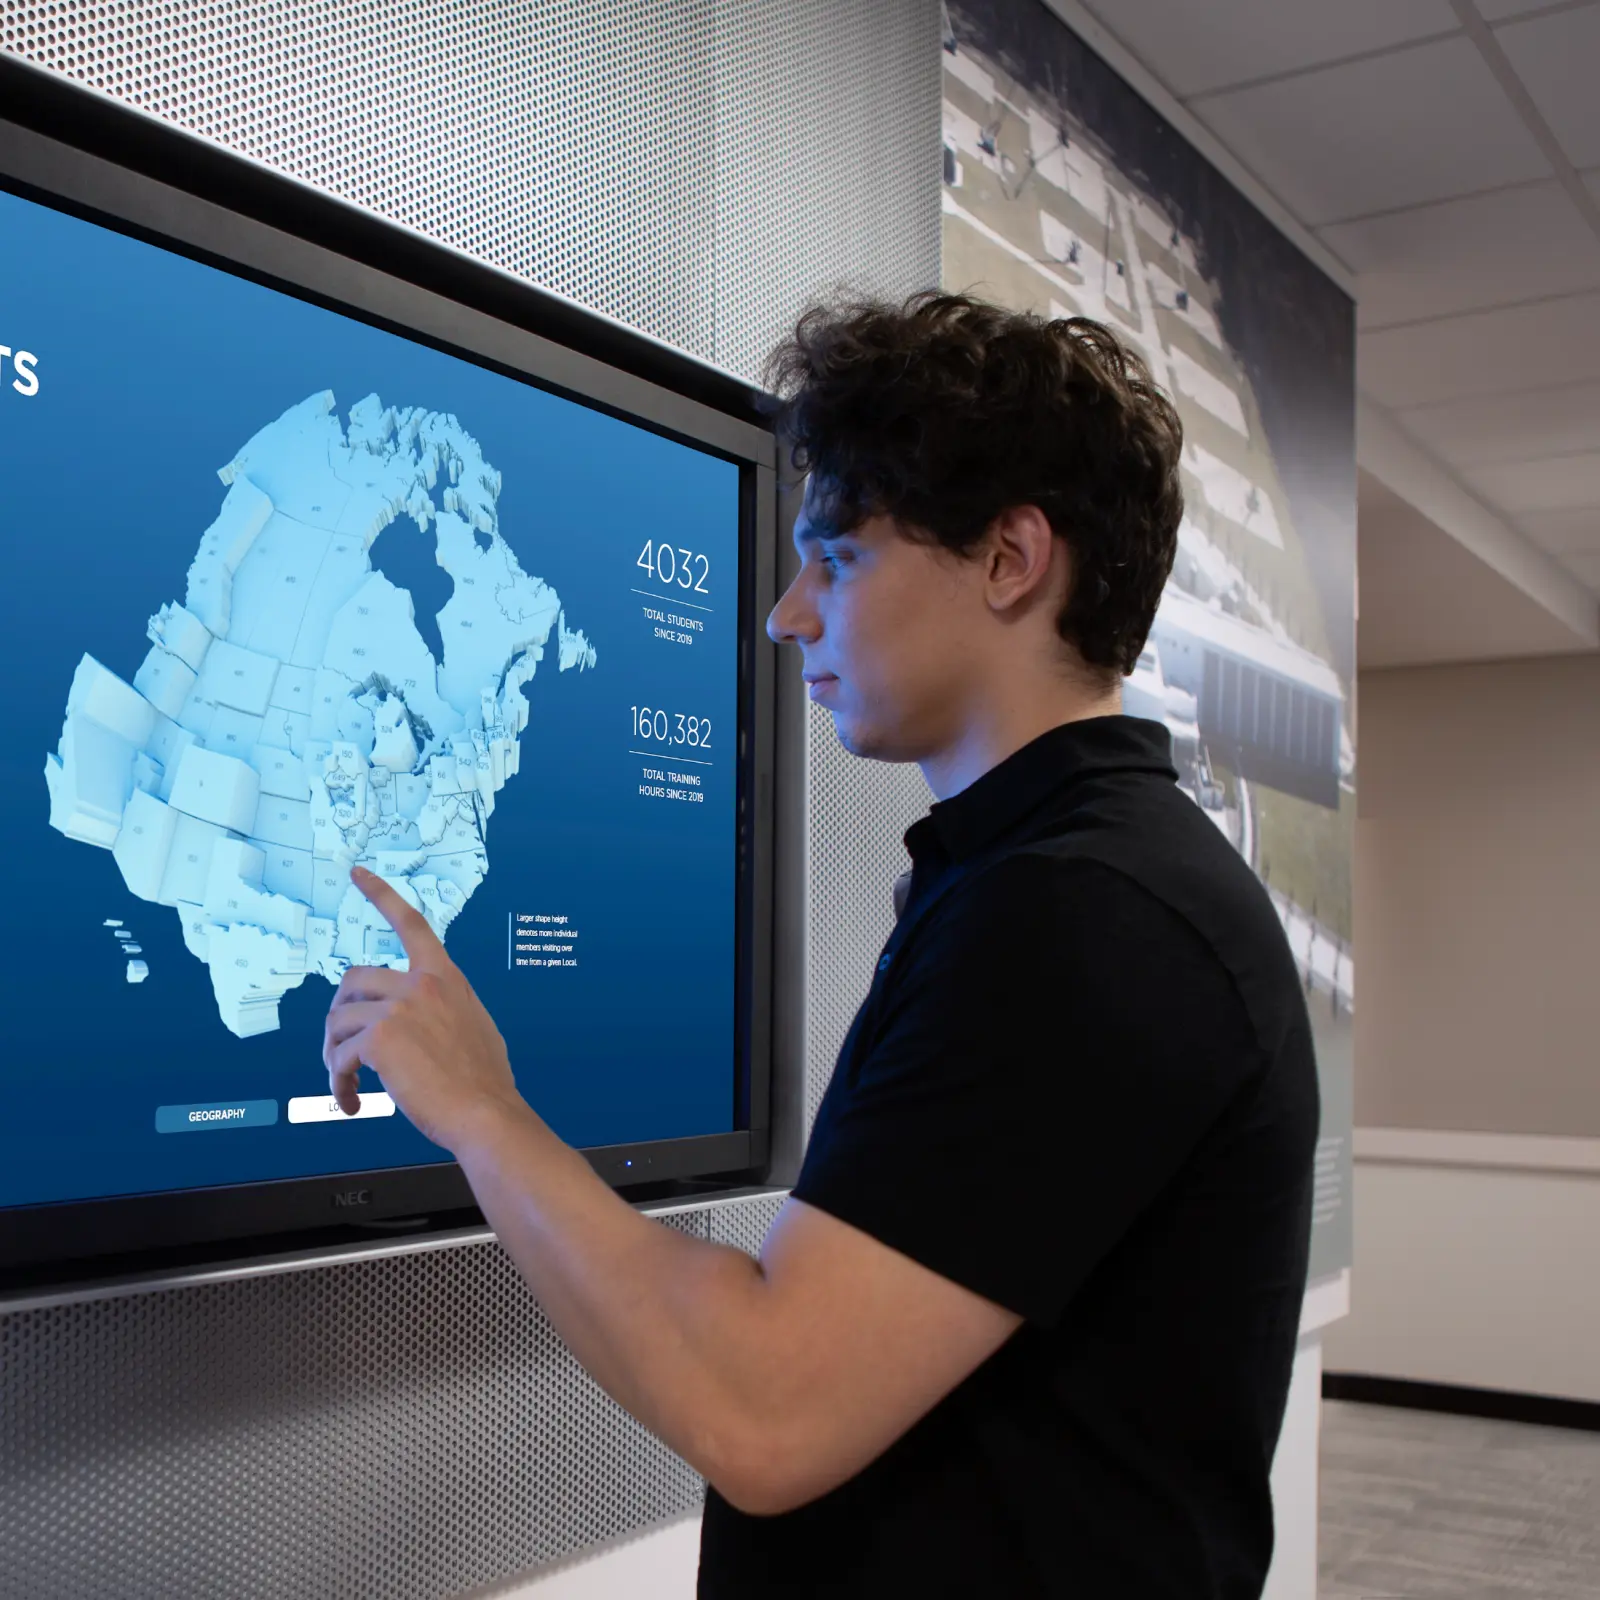 Man interacts with Students at ITEC United States map data visualization on wall-mounted touchscreen display